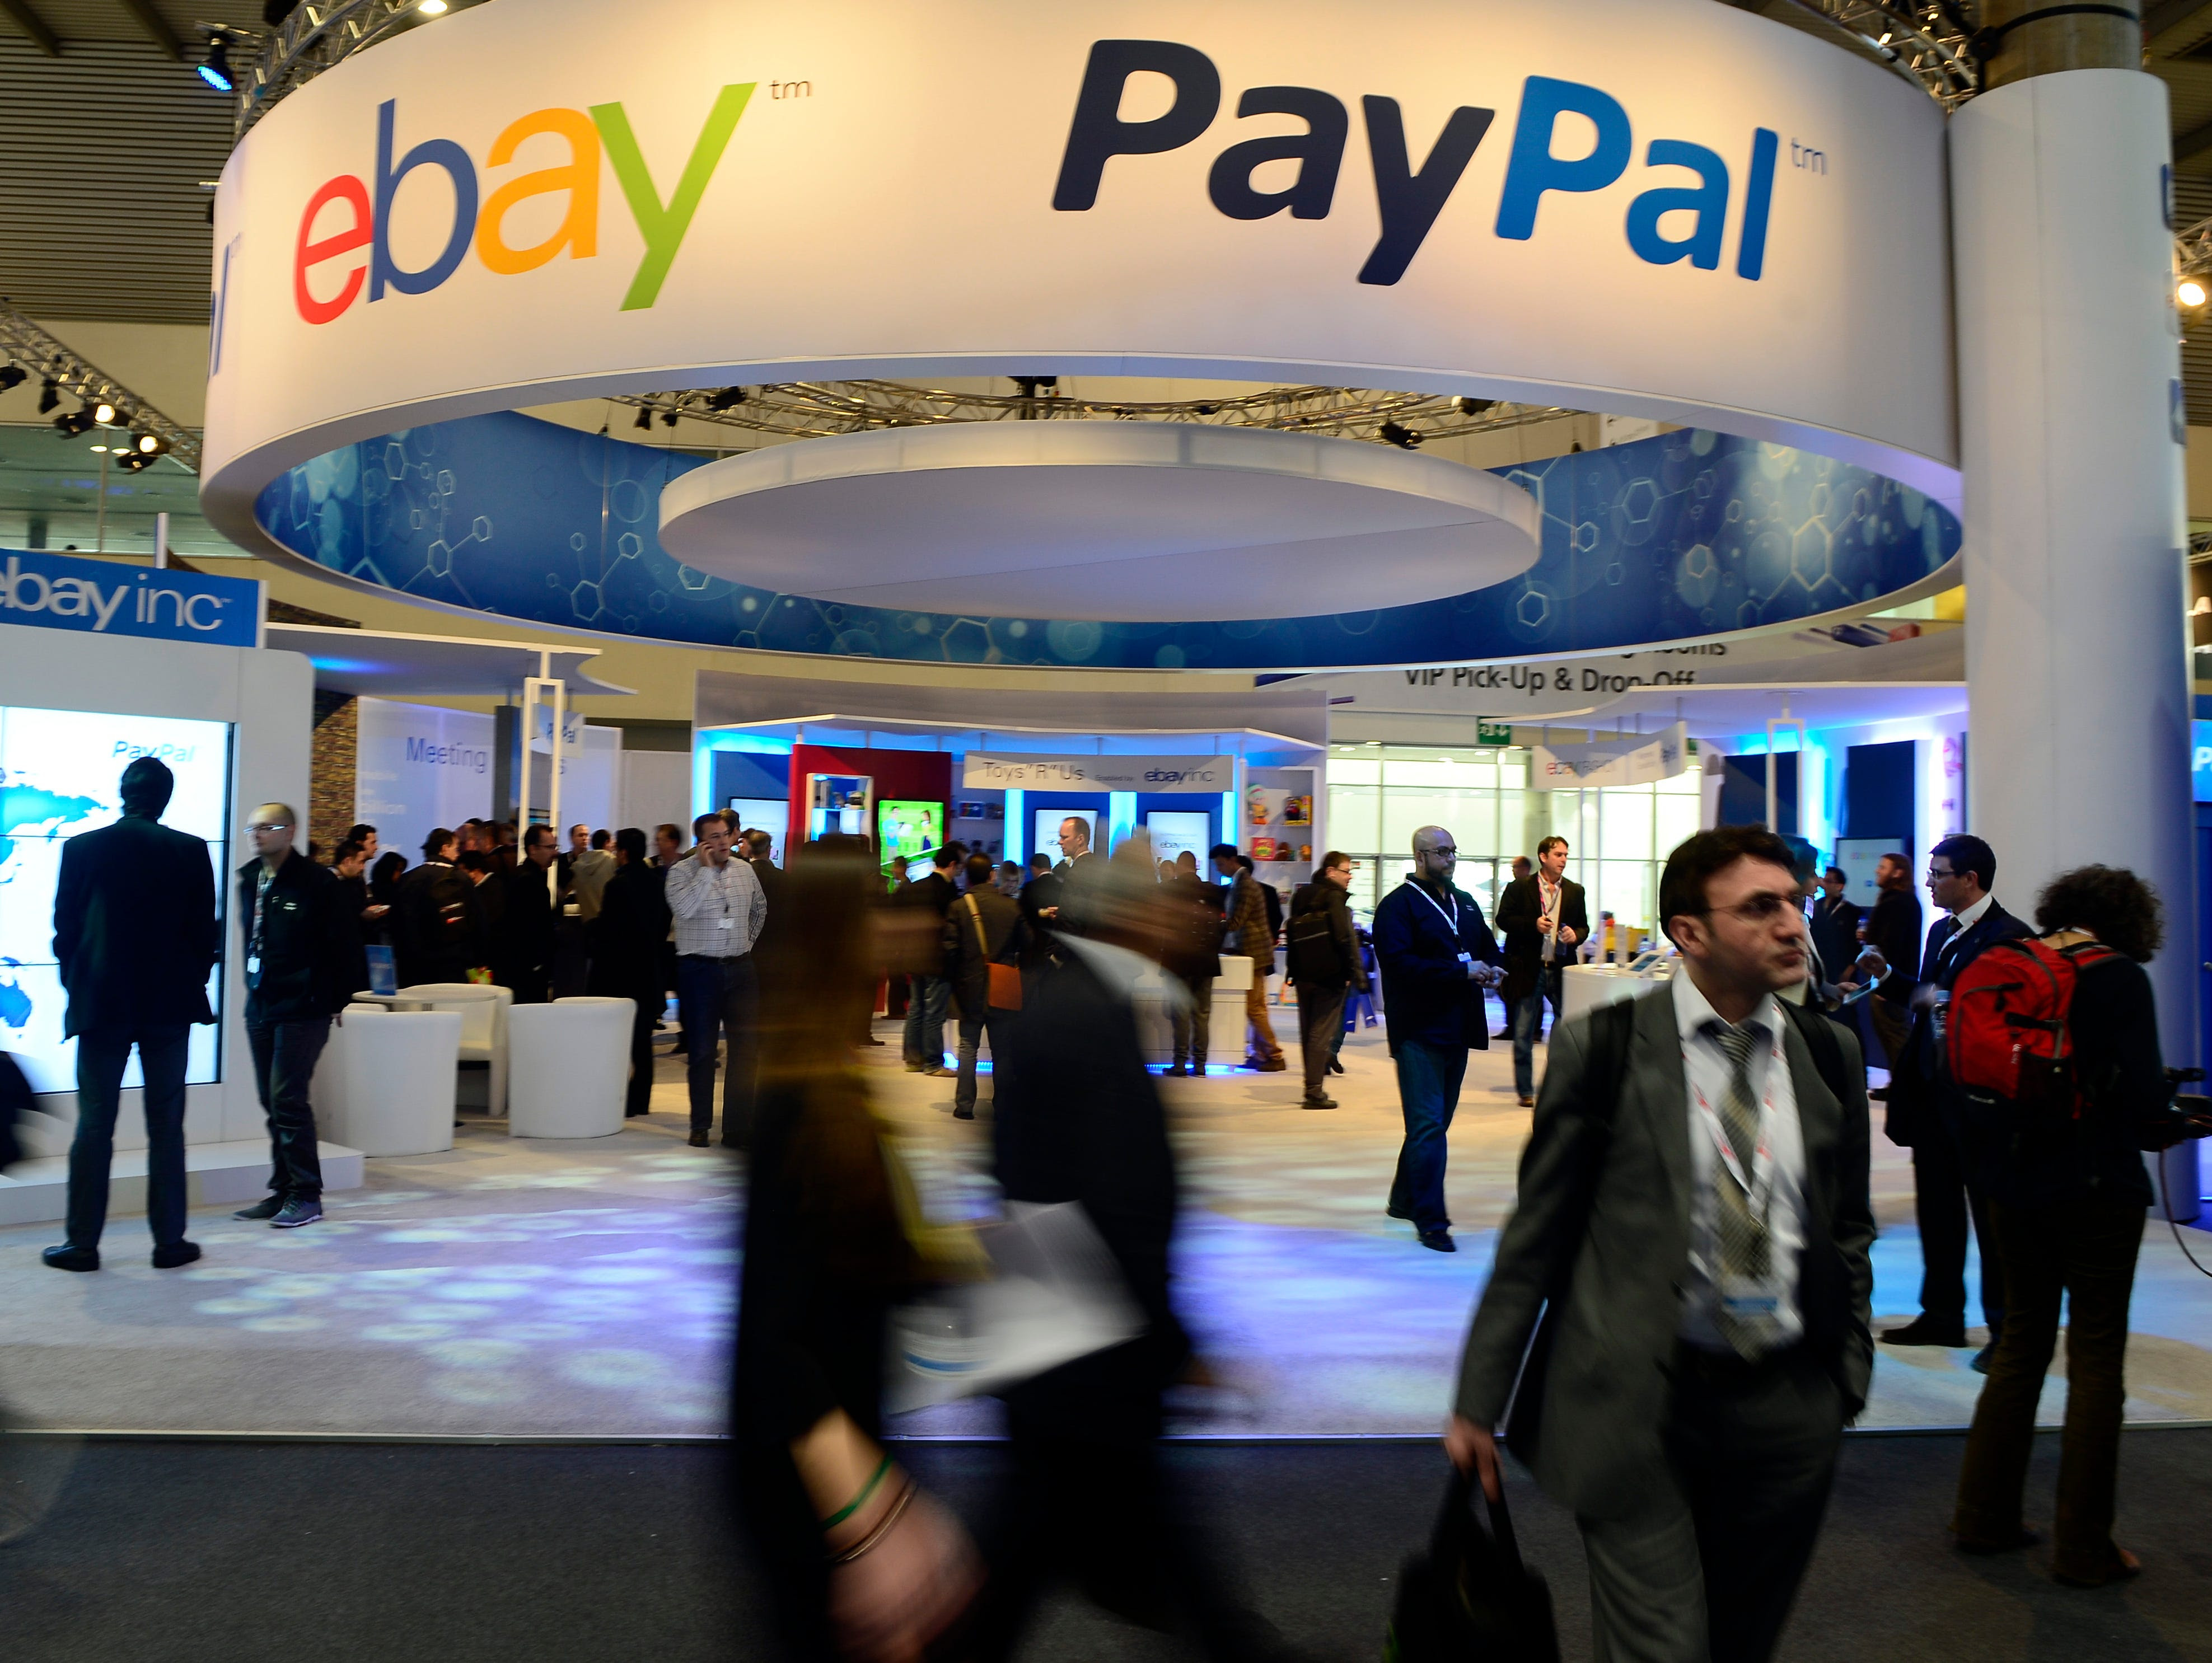 Attendees walk in front of an EBay and PayPal display area at the Mobile World Congress in 2013, the world's largest mobile phone trade show, in Barcelona, Spain.